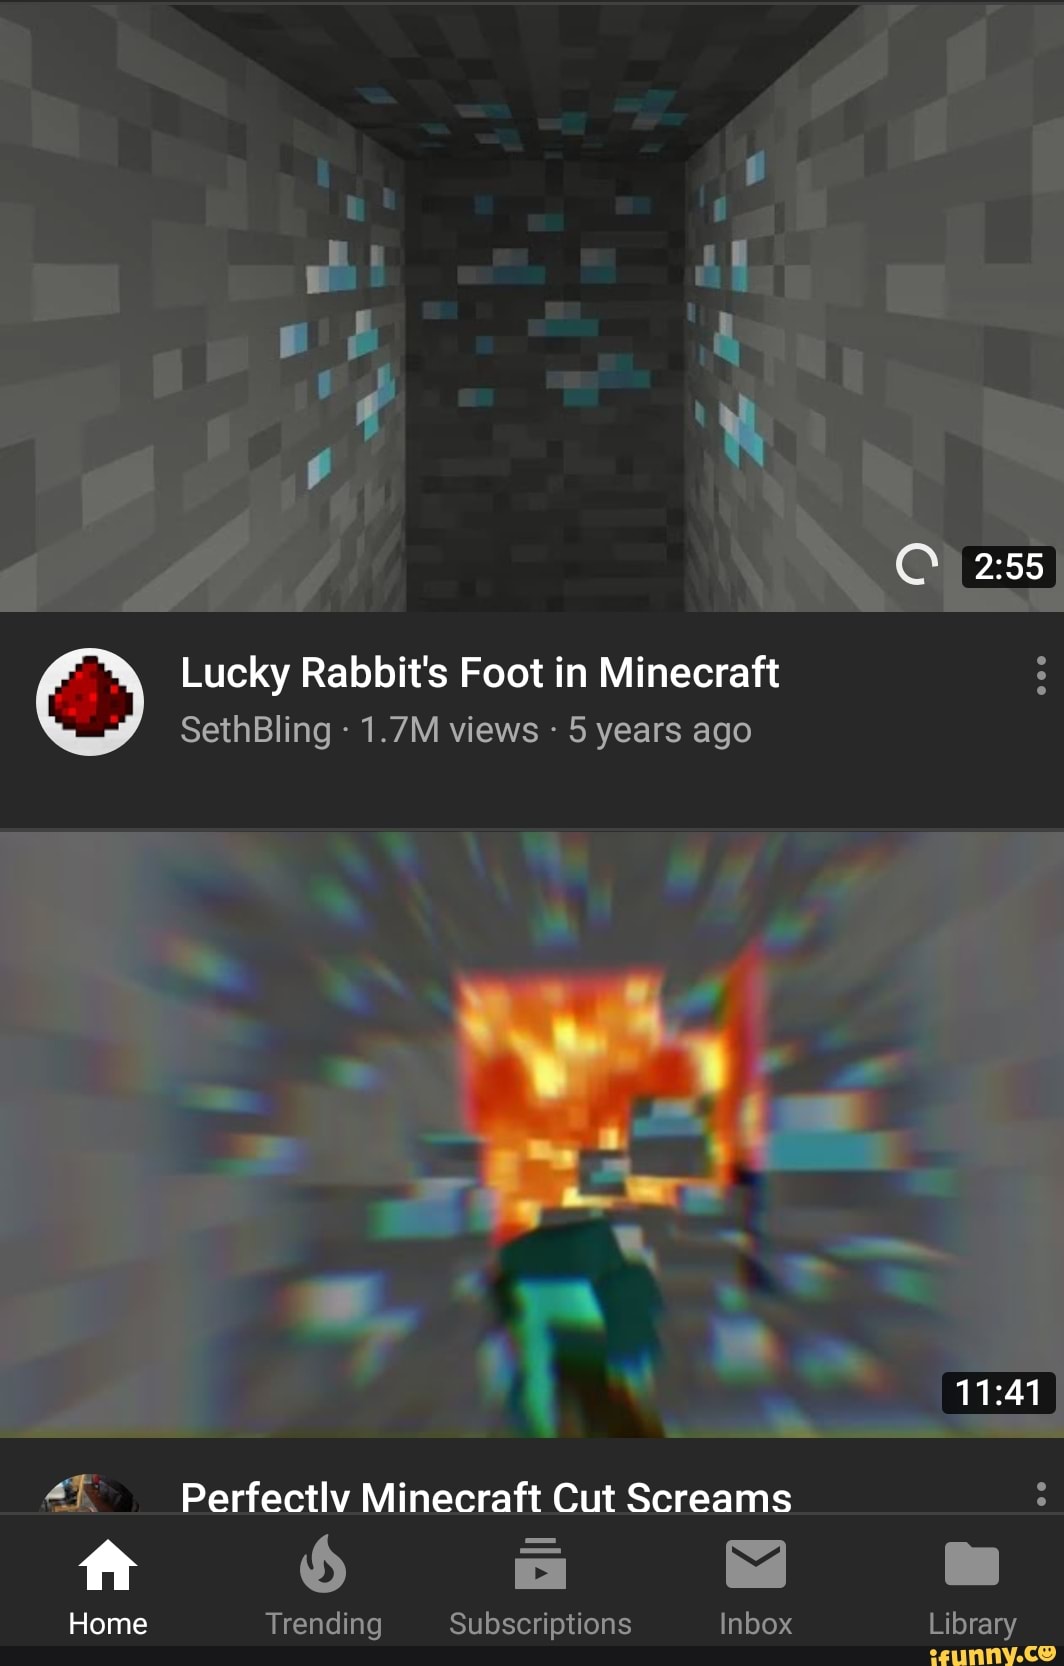 Lucky Rabbit S Foot In Minecraft Sethbiing 1 7m Views 5 Years Ago ª Perfectlv Minecraft Cut Screams ﬂ 6 E Trending Subscriptions Inbox Ifunny